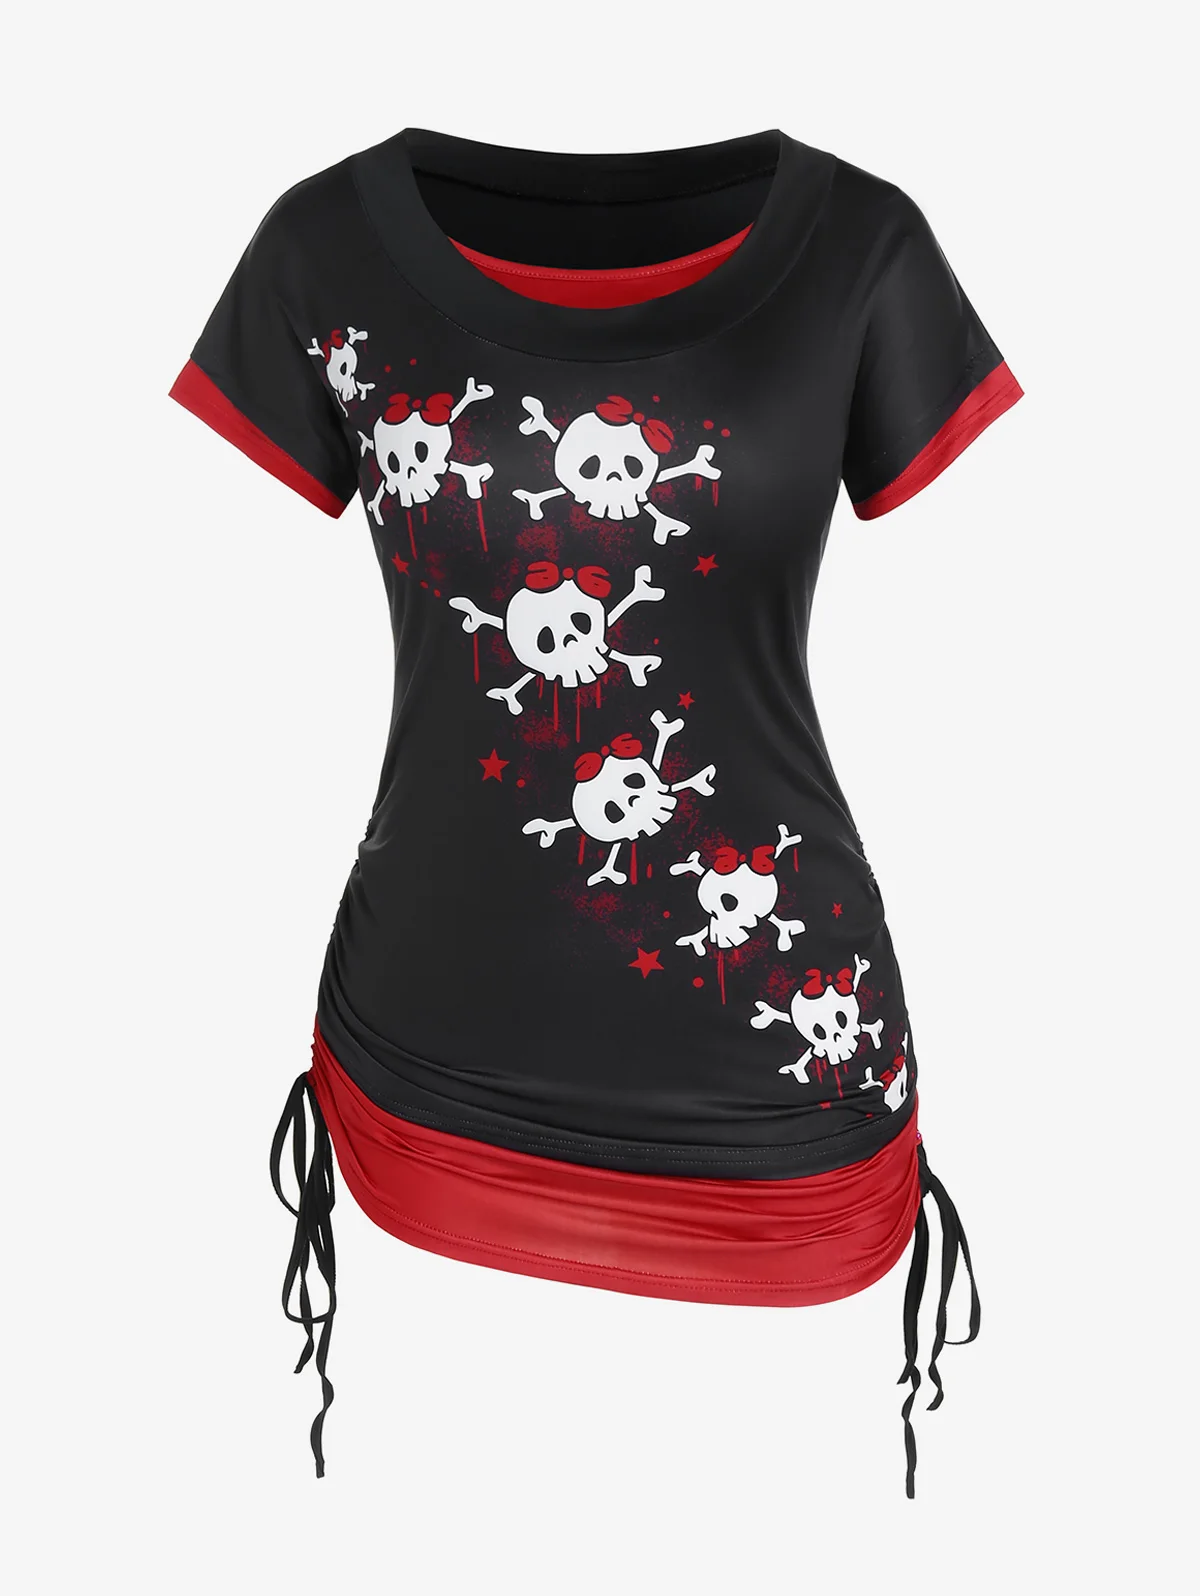 

ROSEGAL Gothic Skull Print Cinched 2 In 1 Tees For Women Summer Short Sleeve Scoop Neck Bowknot Shirring Faux Twinset Top 4XL